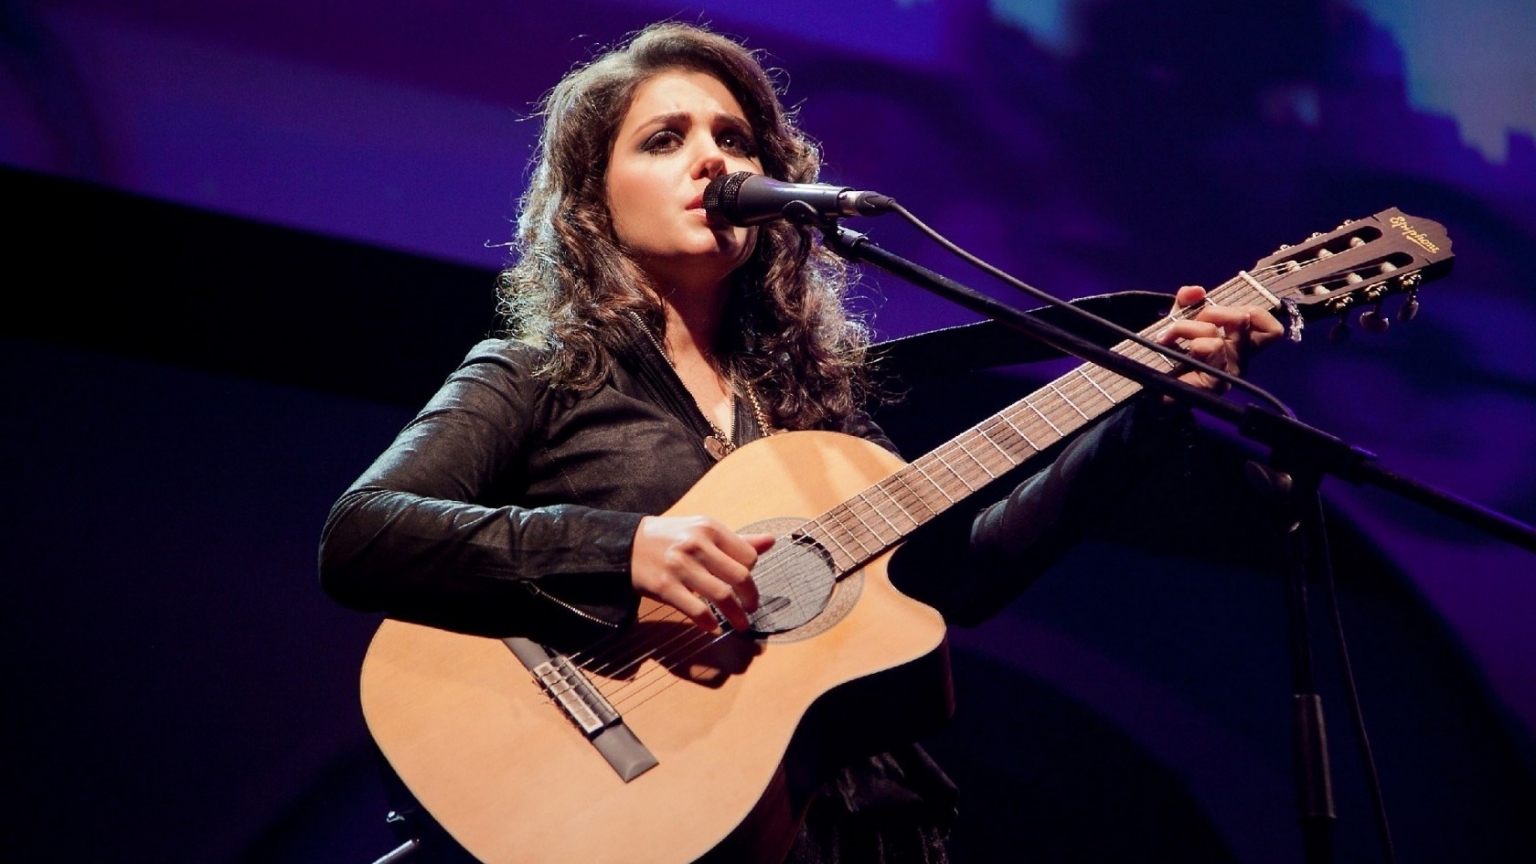 Katie Melua Performing on Stage for 1536 x 864 HDTV resolution